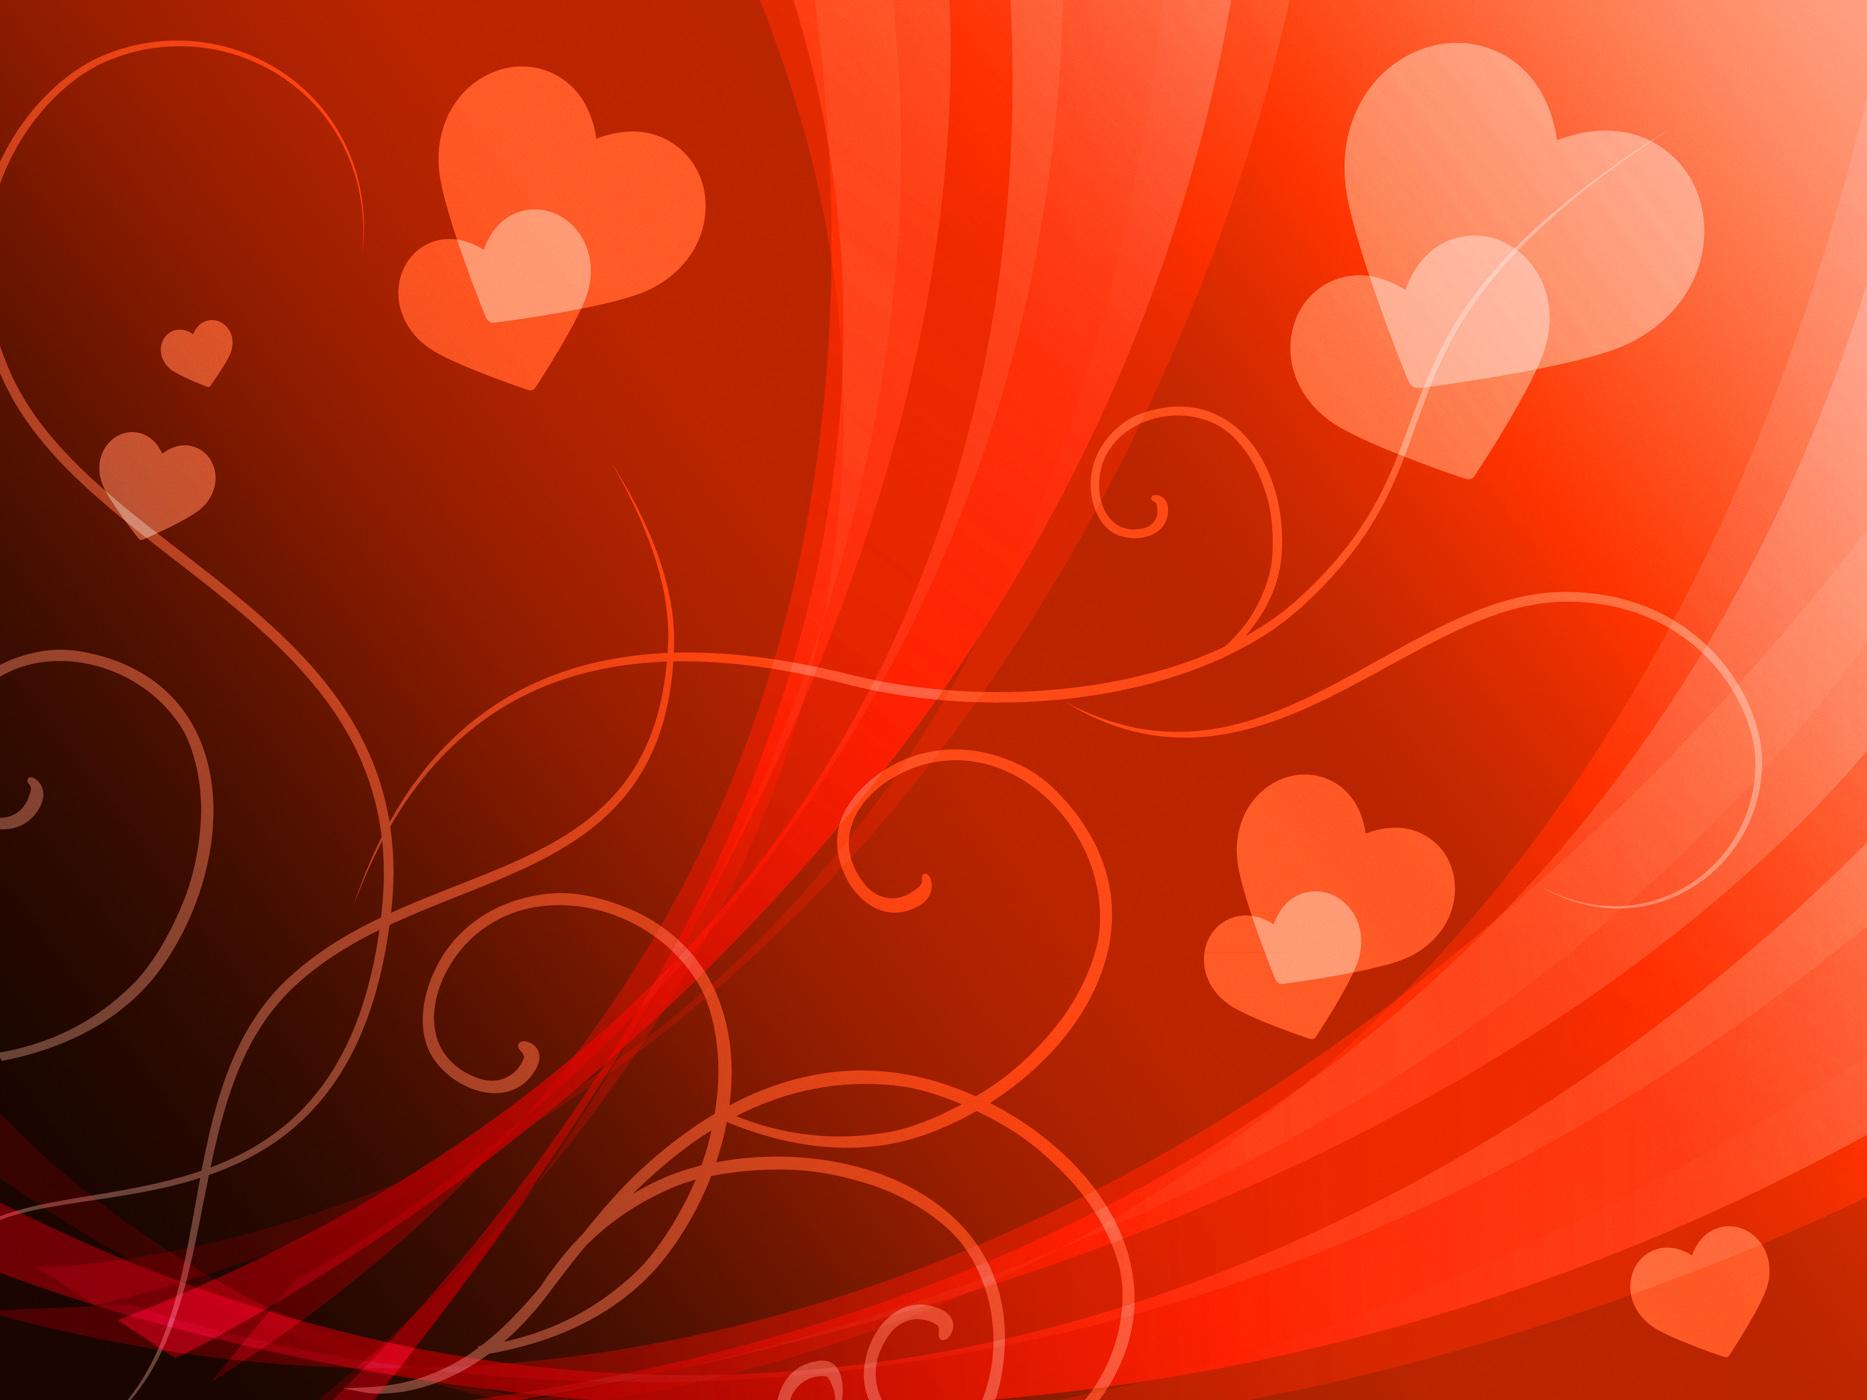 Free photo: Elegant Hearts Background Shows Delicate